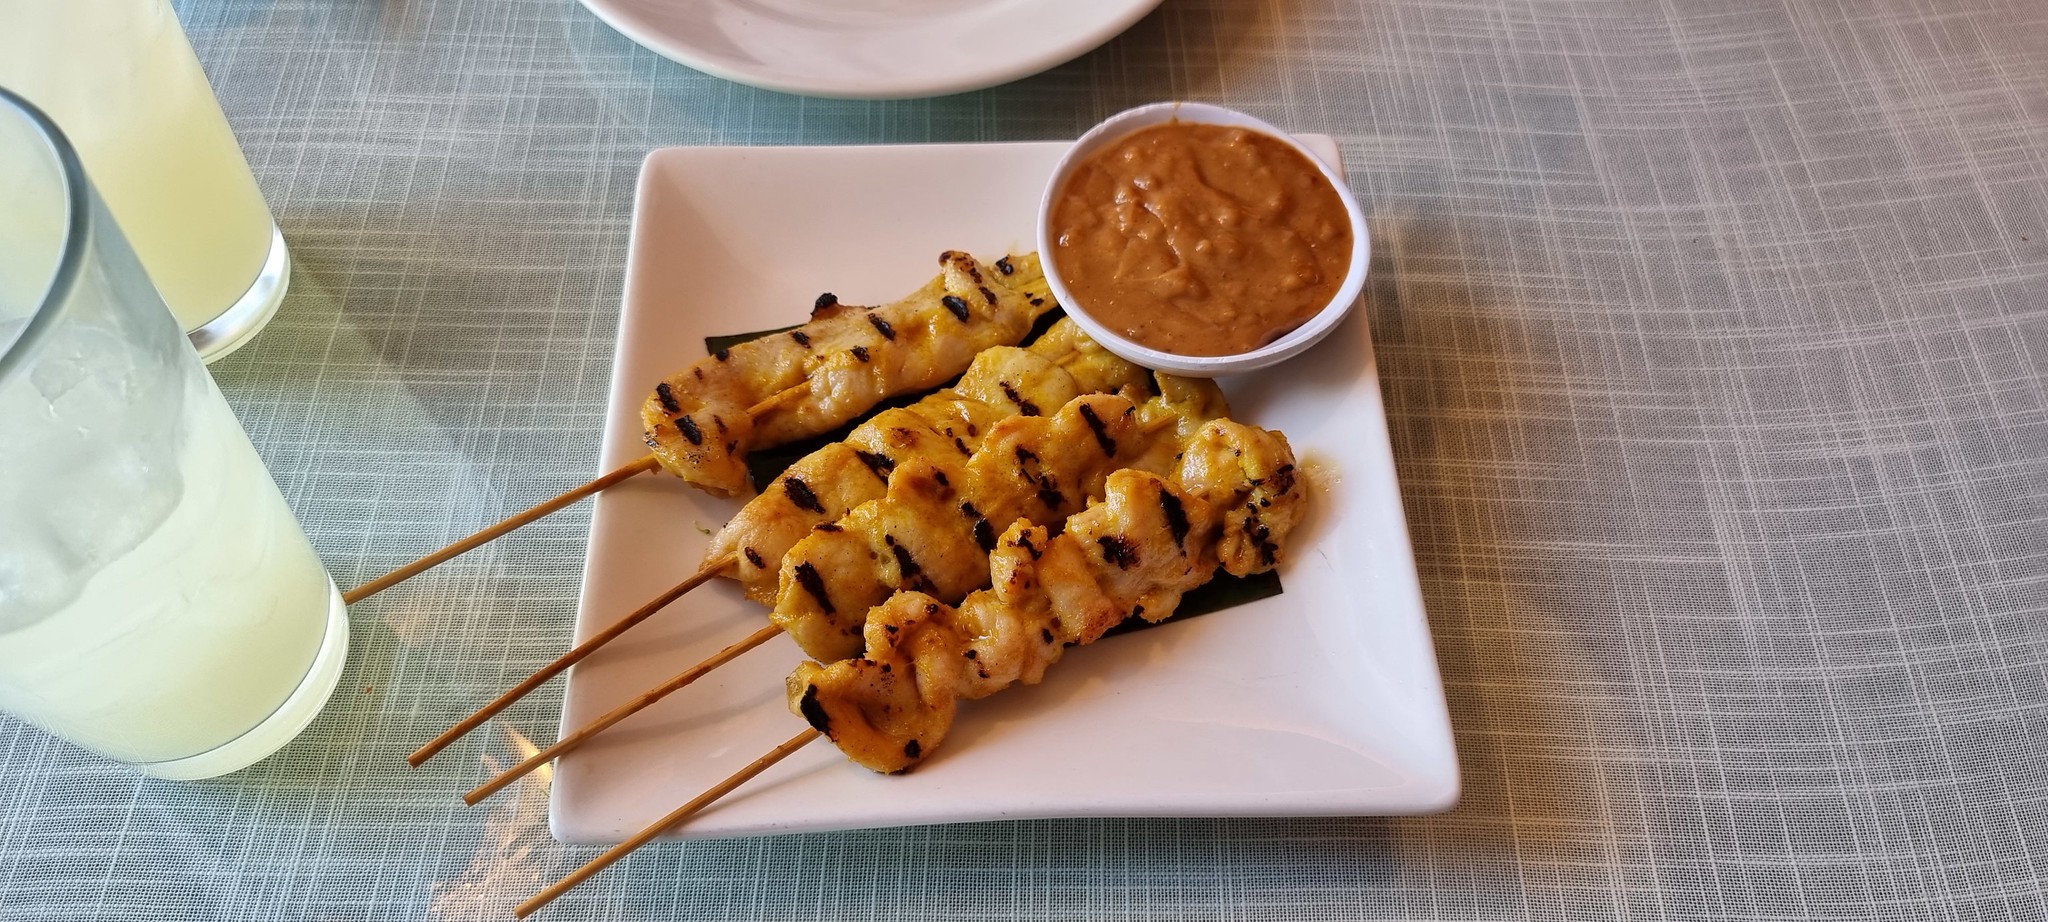 Our satay chicken starter at Talay Thai in Rancho Mirage